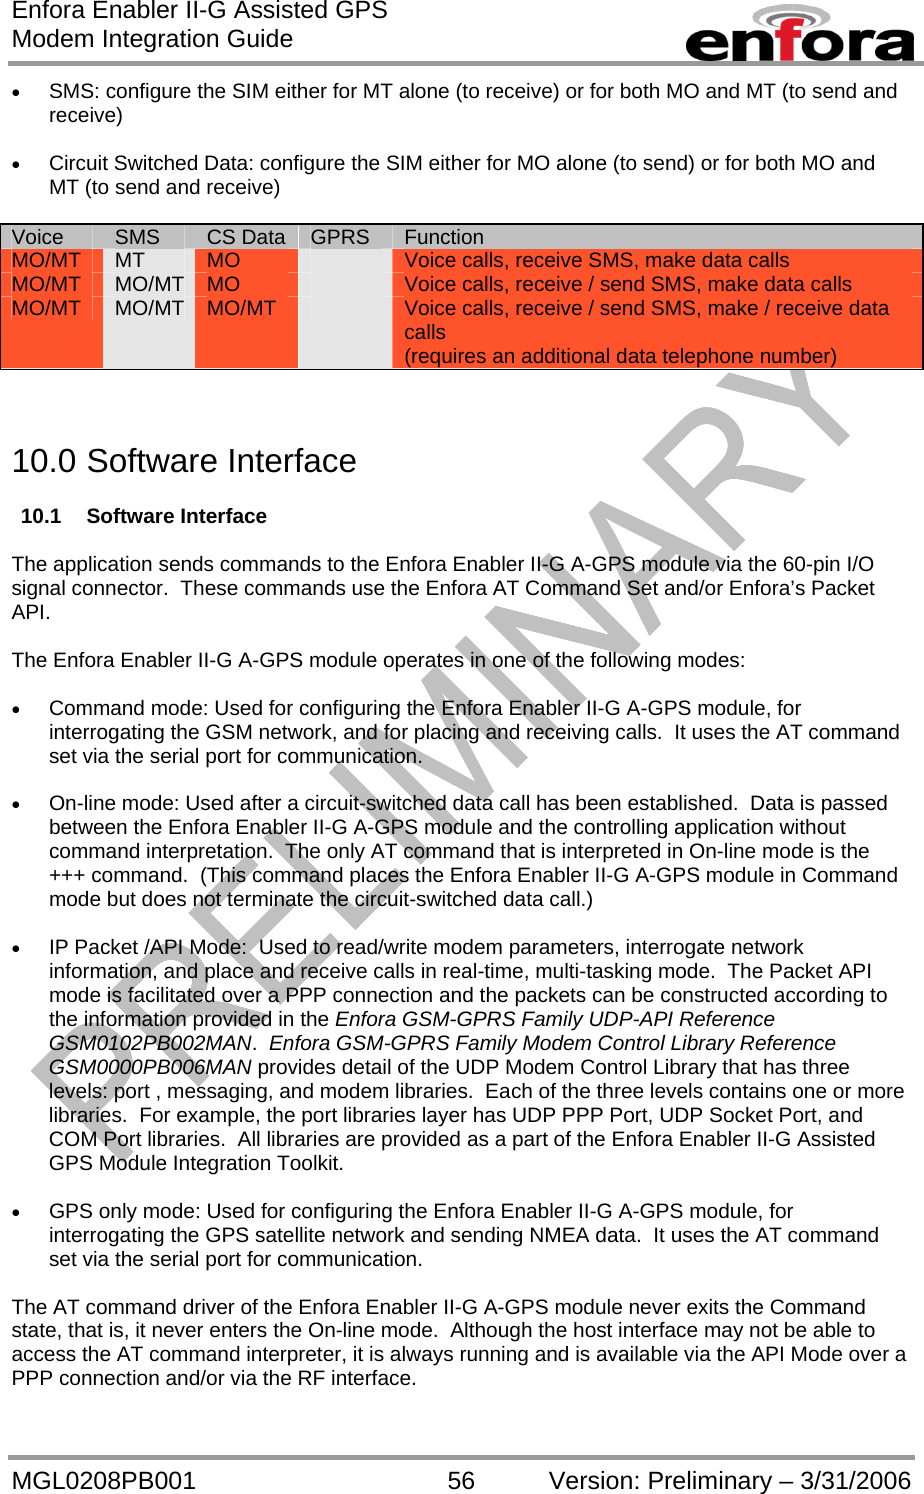 Enfora Enabler II-G Assisted GPS Modem Integration Guide MGL0208PB001 56 Version: Preliminary – 3/31/2006 •  SMS: configure the SIM either for MT alone (to receive) or for both MO and MT (to send and receive)  •  Circuit Switched Data: configure the SIM either for MO alone (to send) or for both MO and MT (to send and receive)  Voice  SMS  CS Data  GPRS  Function MO/MT  MT  MO   Voice calls, receive SMS, make data calls MO/MT  MO/MT MO  Voice calls, receive / send SMS, make data calls MO/MT  MO/MT MO/MT  Voice calls, receive / send SMS, make / receive data calls (requires an additional data telephone number)    10.0 Software Interface  10.1 Software Interface  The application sends commands to the Enfora Enabler II-G A-GPS module via the 60-pin I/O signal connector.  These commands use the Enfora AT Command Set and/or Enfora’s Packet API.  The Enfora Enabler II-G A-GPS module operates in one of the following modes:  •  Command mode: Used for configuring the Enfora Enabler II-G A-GPS module, for interrogating the GSM network, and for placing and receiving calls.  It uses the AT command set via the serial port for communication.  •  On-line mode: Used after a circuit-switched data call has been established.  Data is passed between the Enfora Enabler II-G A-GPS module and the controlling application without command interpretation.  The only AT command that is interpreted in On-line mode is the +++ command.  (This command places the Enfora Enabler II-G A-GPS module in Command mode but does not terminate the circuit-switched data call.)  •  IP Packet /API Mode:  Used to read/write modem parameters, interrogate network information, and place and receive calls in real-time, multi-tasking mode.  The Packet API mode is facilitated over a PPP connection and the packets can be constructed according to the information provided in the Enfora GSM-GPRS Family UDP-API Reference GSM0102PB002MAN.  Enfora GSM-GPRS Family Modem Control Library Reference GSM0000PB006MAN provides detail of the UDP Modem Control Library that has three levels: port , messaging, and modem libraries.  Each of the three levels contains one or more libraries.  For example, the port libraries layer has UDP PPP Port, UDP Socket Port, and COM Port libraries.  All libraries are provided as a part of the Enfora Enabler II-G Assisted GPS Module Integration Toolkit.  •  GPS only mode: Used for configuring the Enfora Enabler II-G A-GPS module, for interrogating the GPS satellite network and sending NMEA data.  It uses the AT command set via the serial port for communication.  The AT command driver of the Enfora Enabler II-G A-GPS module never exits the Command state, that is, it never enters the On-line mode.  Although the host interface may not be able to access the AT command interpreter, it is always running and is available via the API Mode over a PPP connection and/or via the RF interface.  